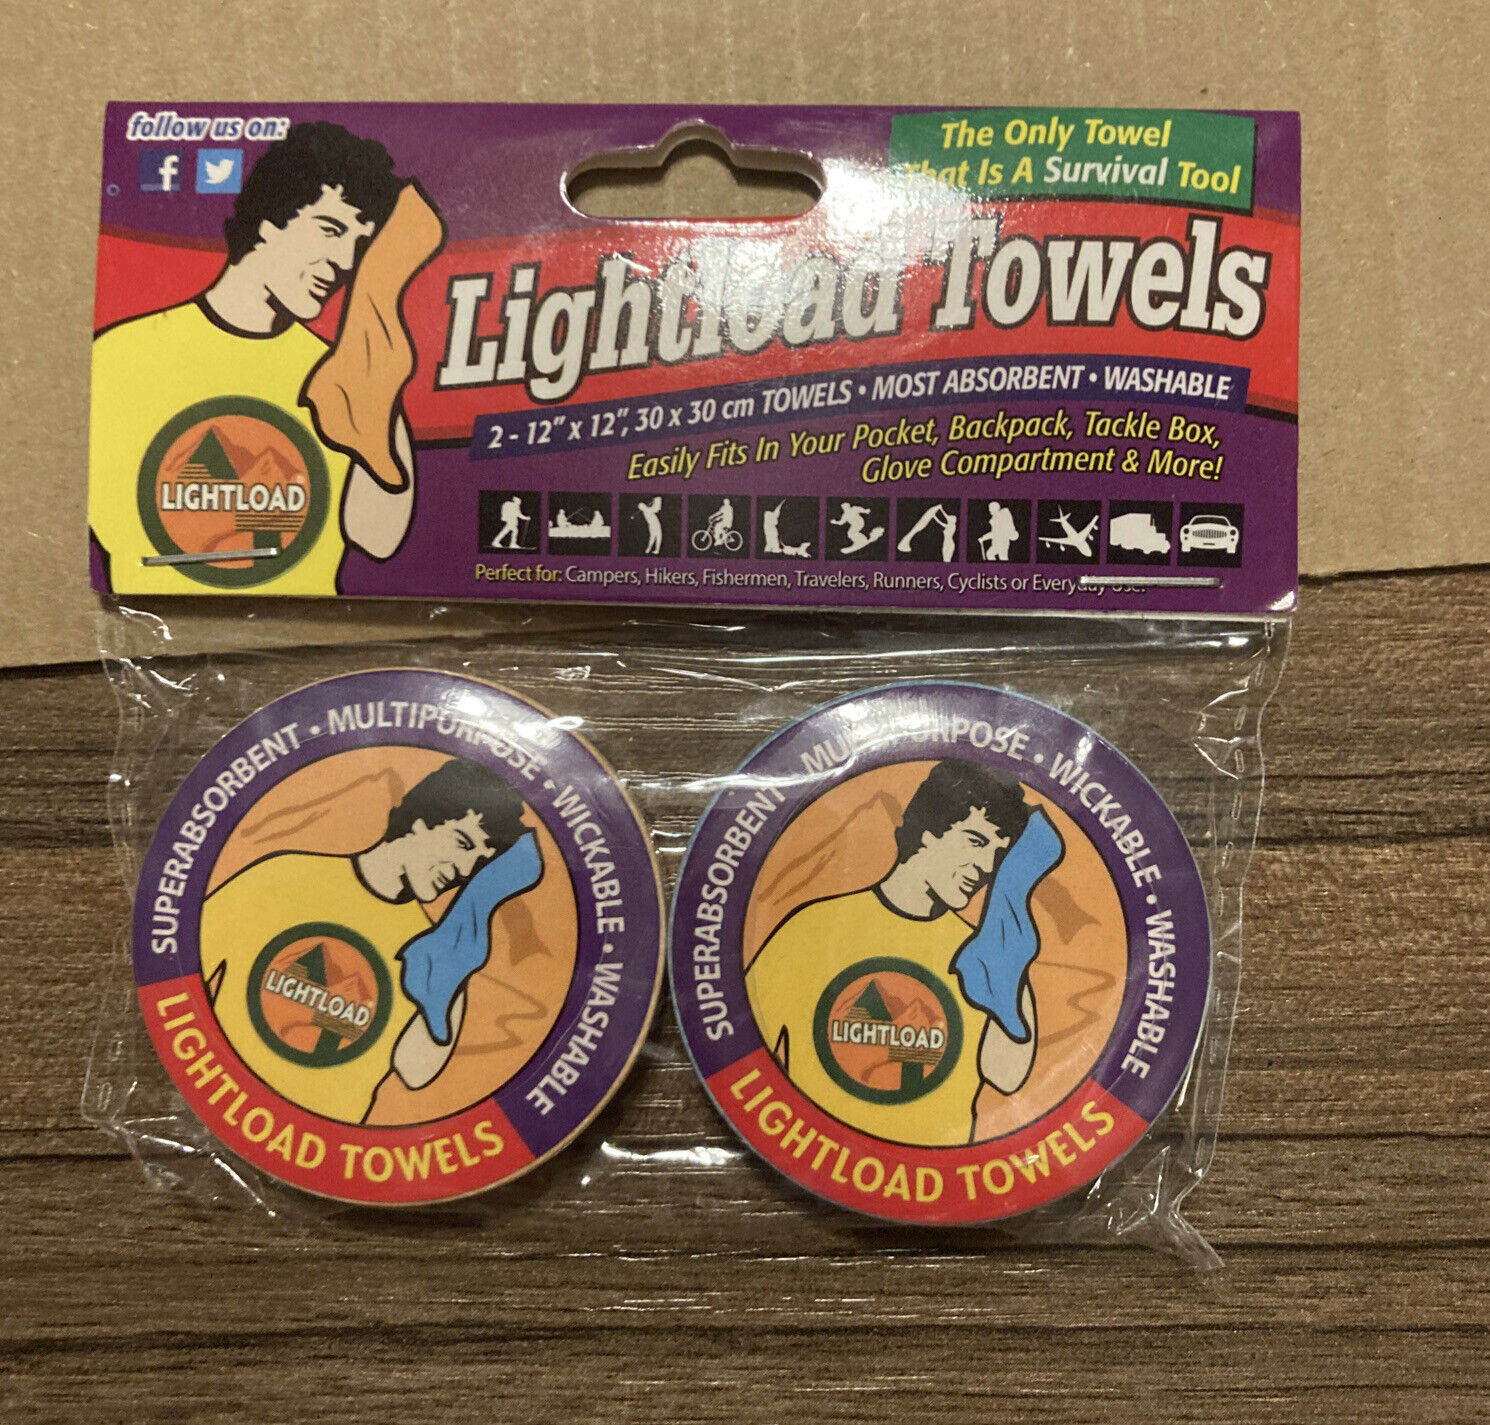 Lightload Compact Reusable 12x12" Towels Weighs .2 Oz. (2 Pack )